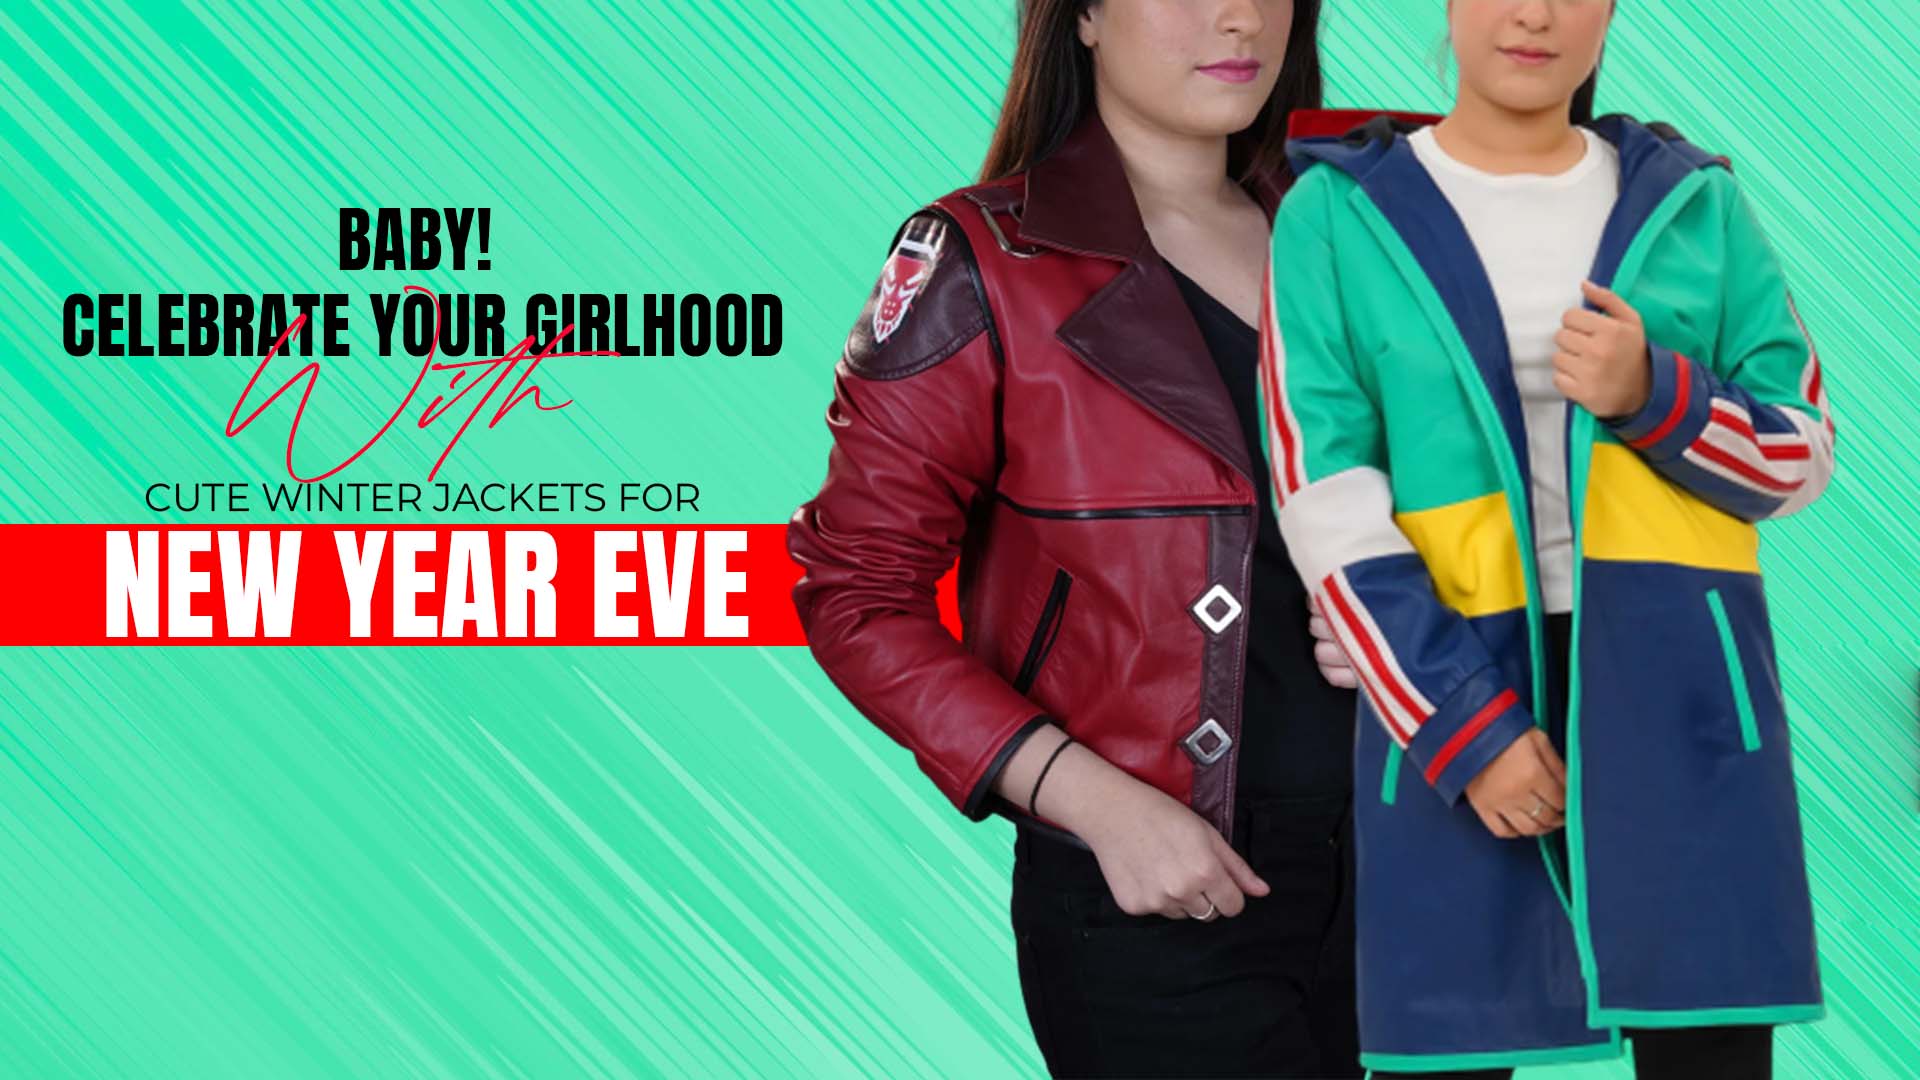 Baby! Celebrate Your Girlhood With The Cute Winter Jackets For New Year Eve